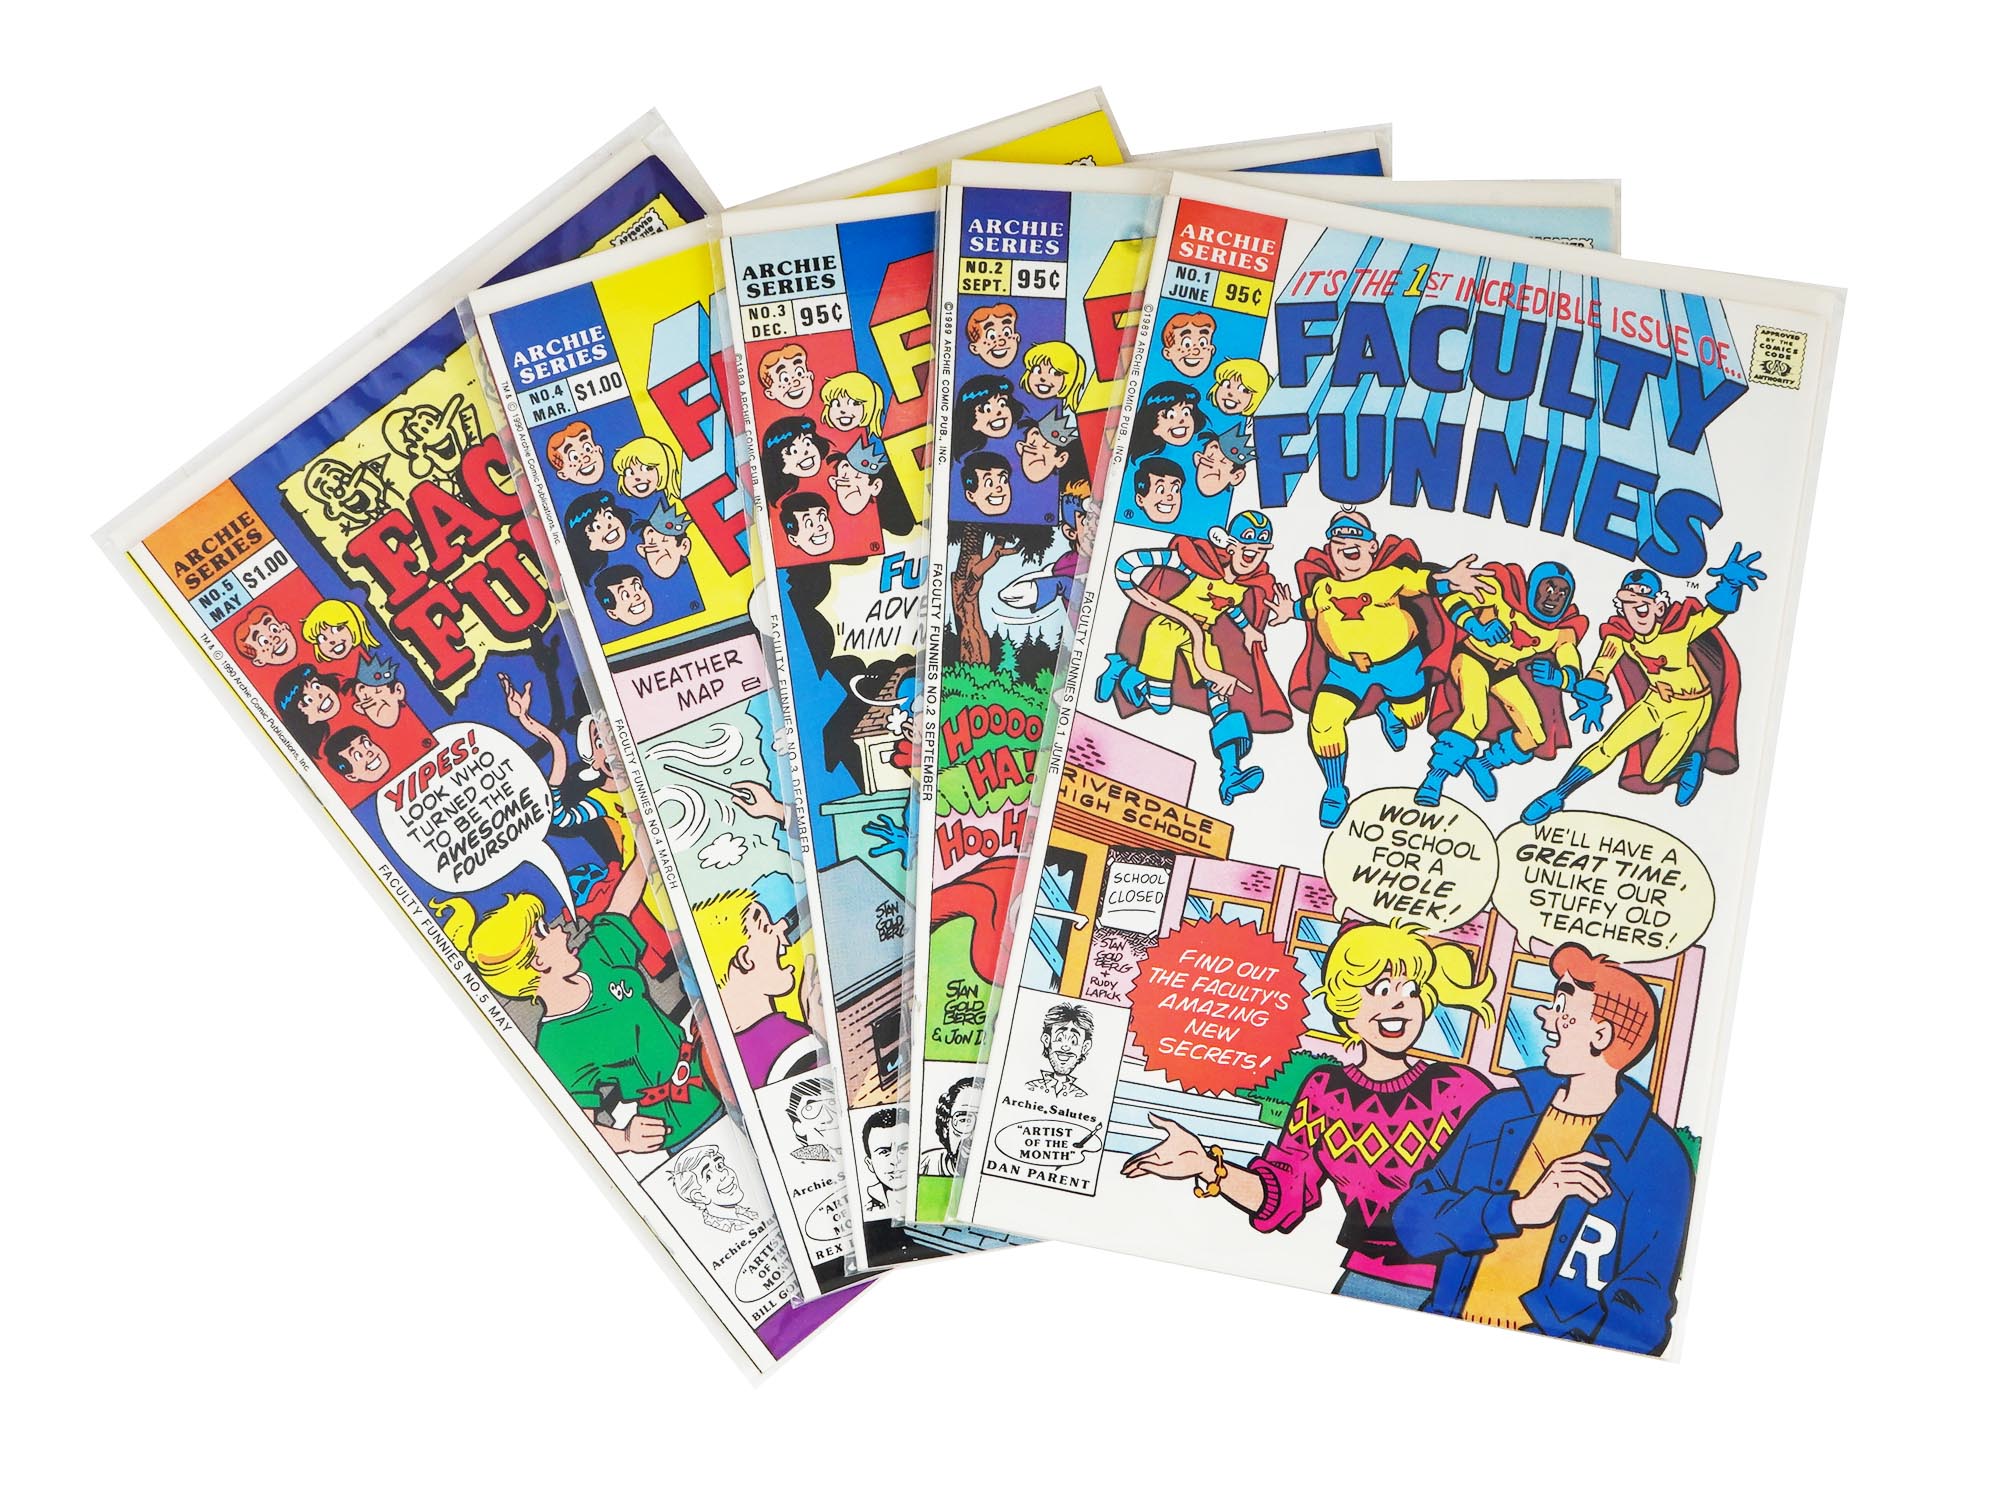 LARGE COLLECTION OF ARCHIE ILLUSTRATION COMICS BOOKS PIC-3